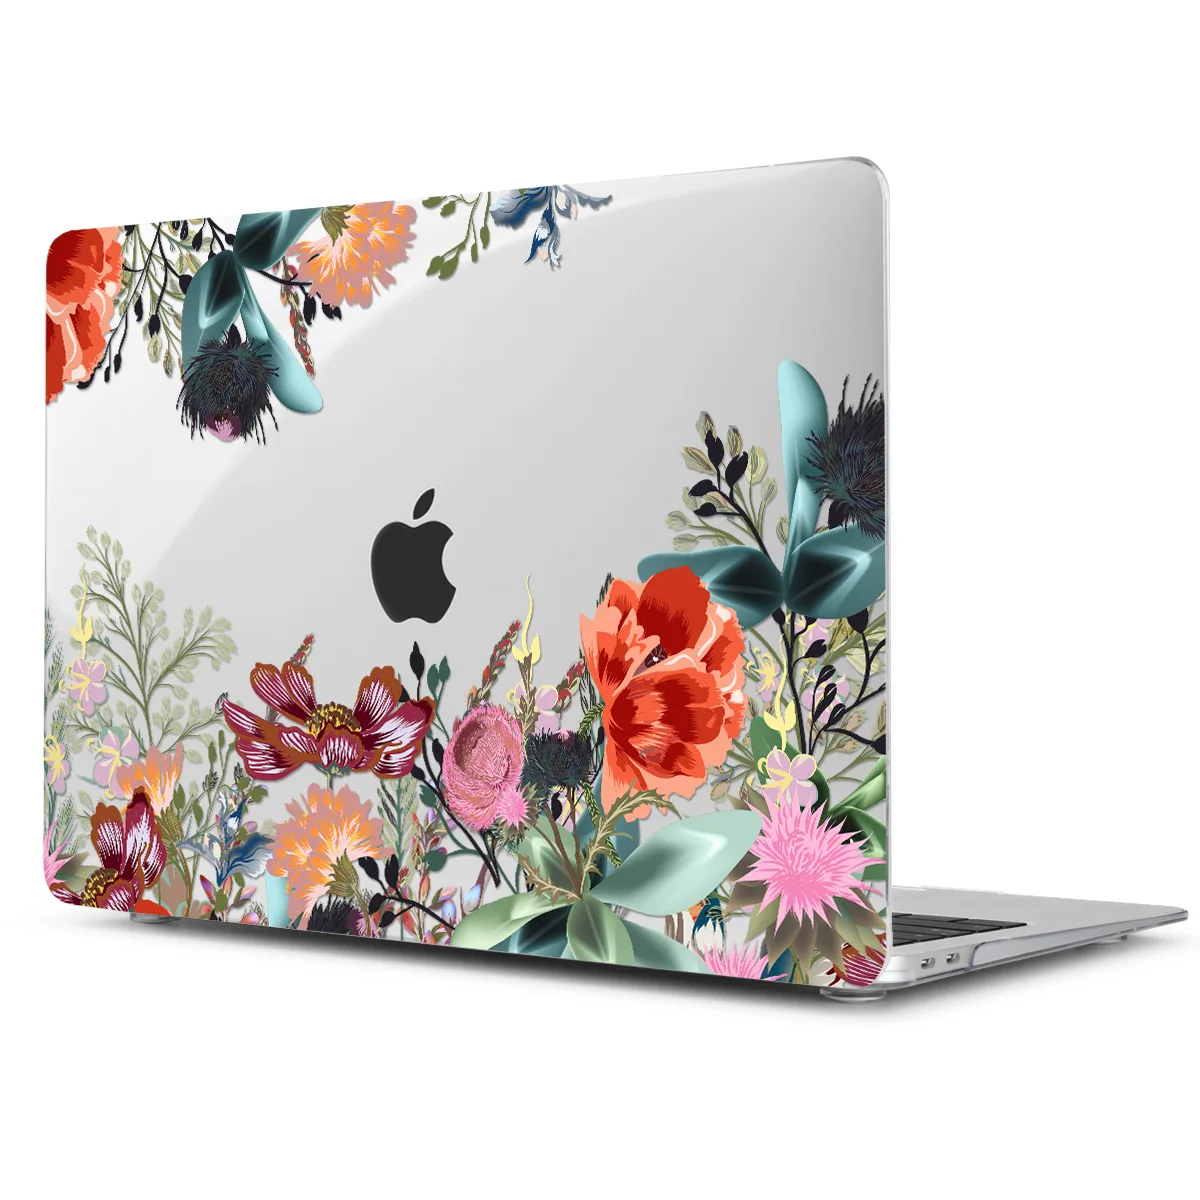 

Hard Crystal Floral Case For MacBook Air 12 /air 13 2020 A2337 retina pro 13.3 15 16 touch bar A2338 Flowers Laptop Case Sleeve, 15 colors